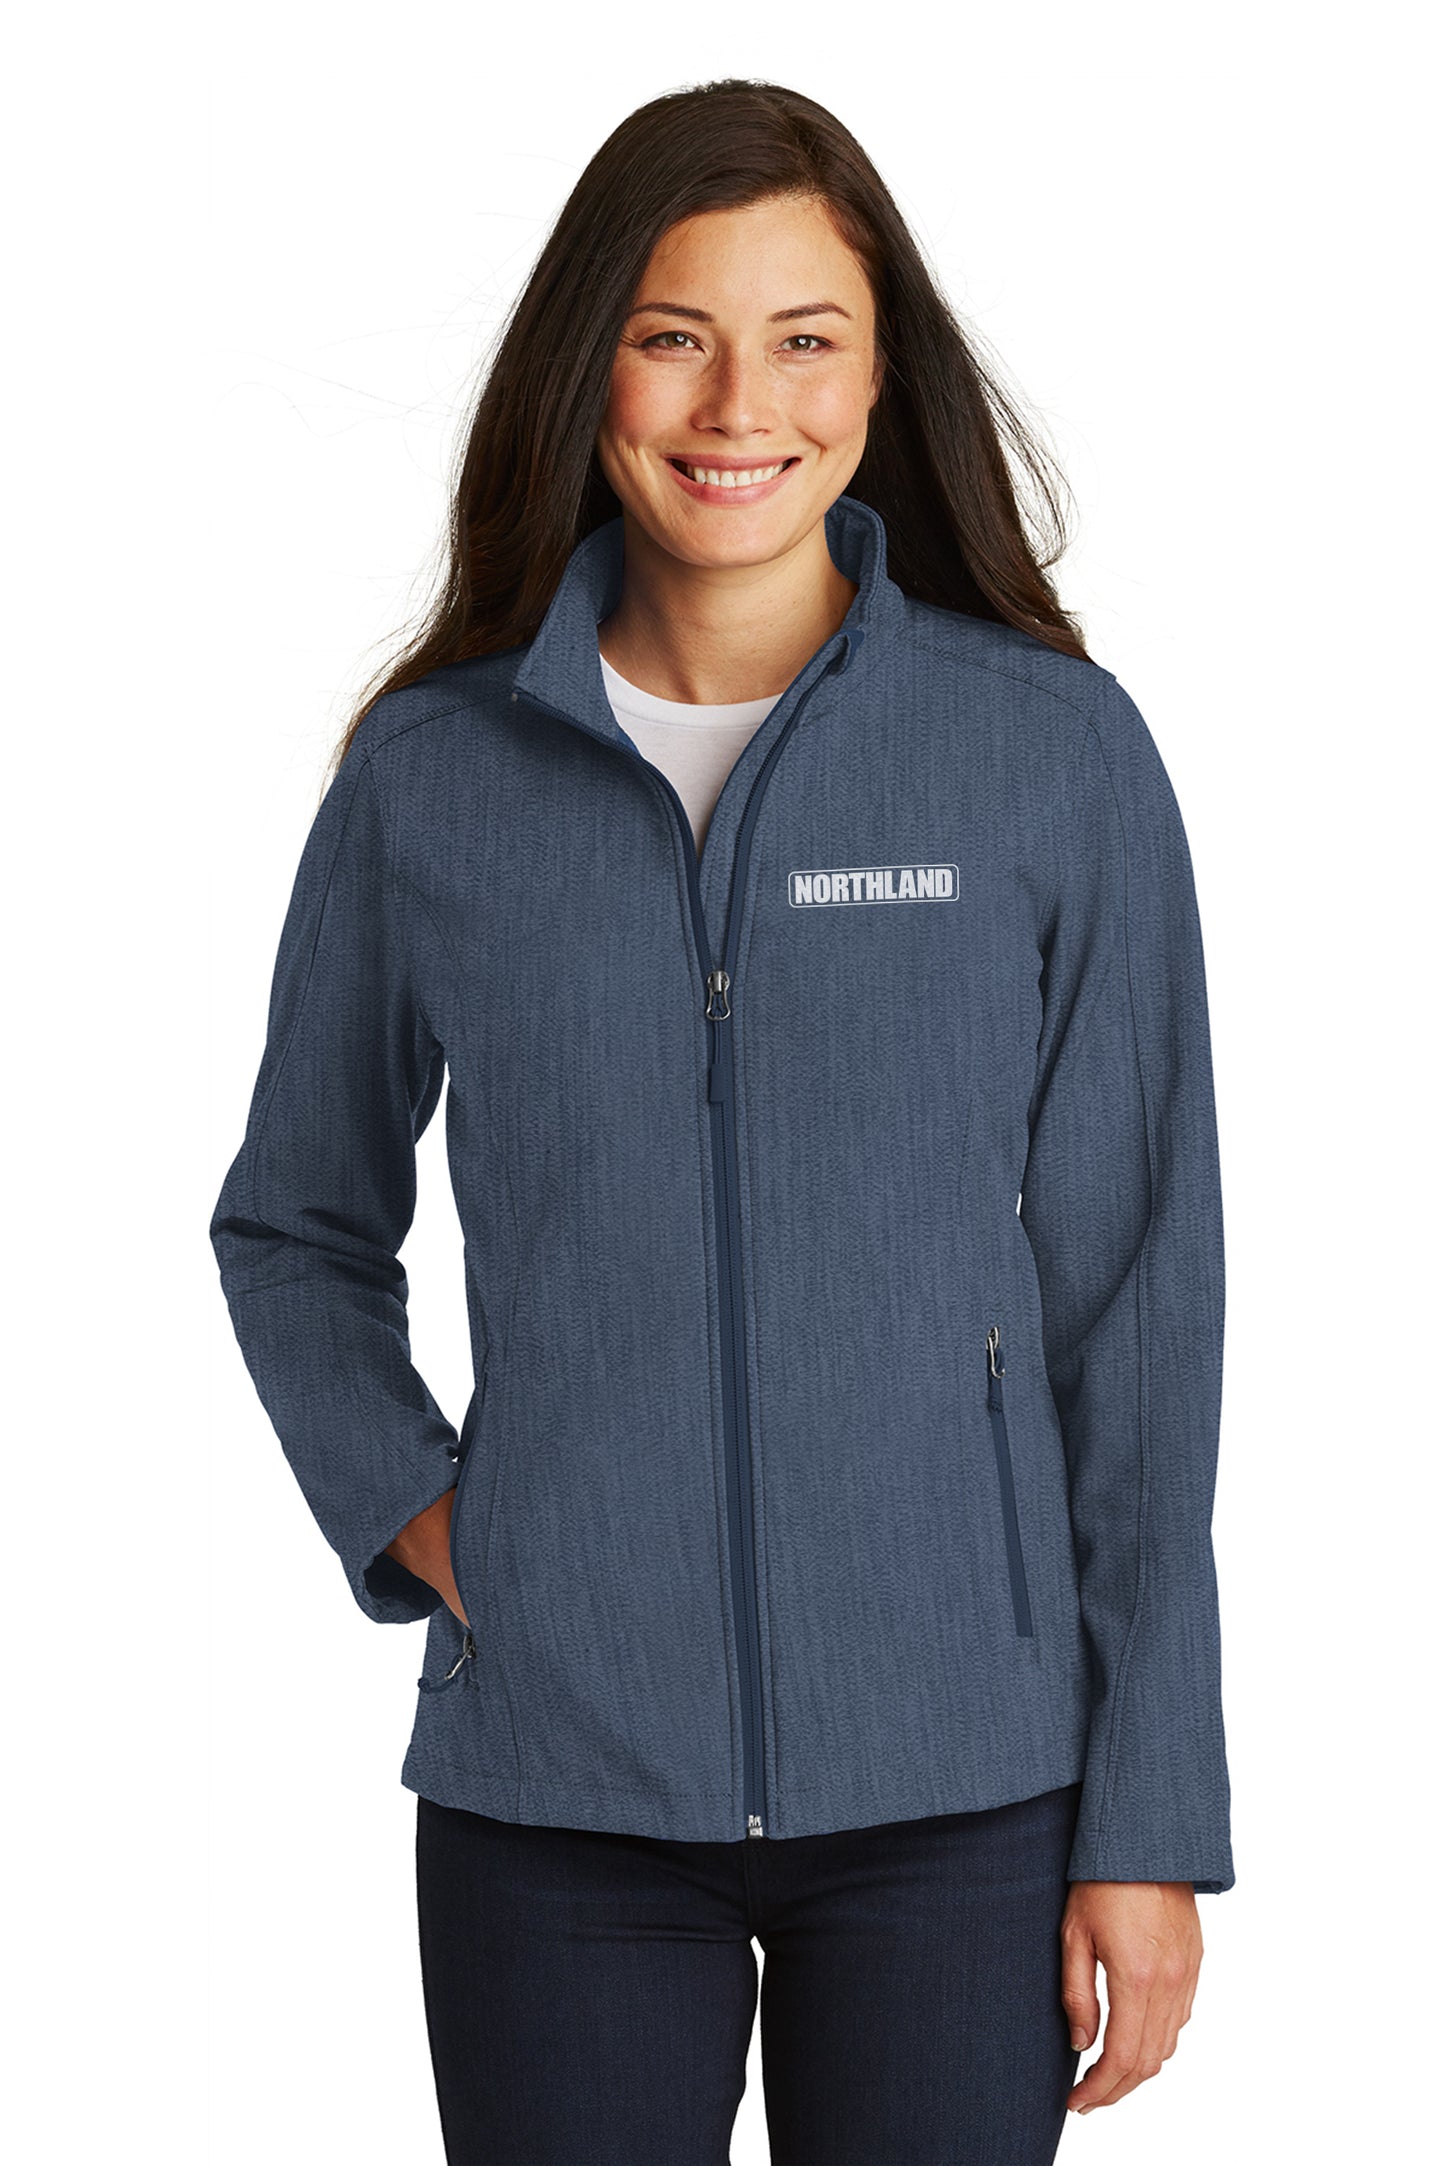 Northland Constructors Ladies Soft Shell Jacket